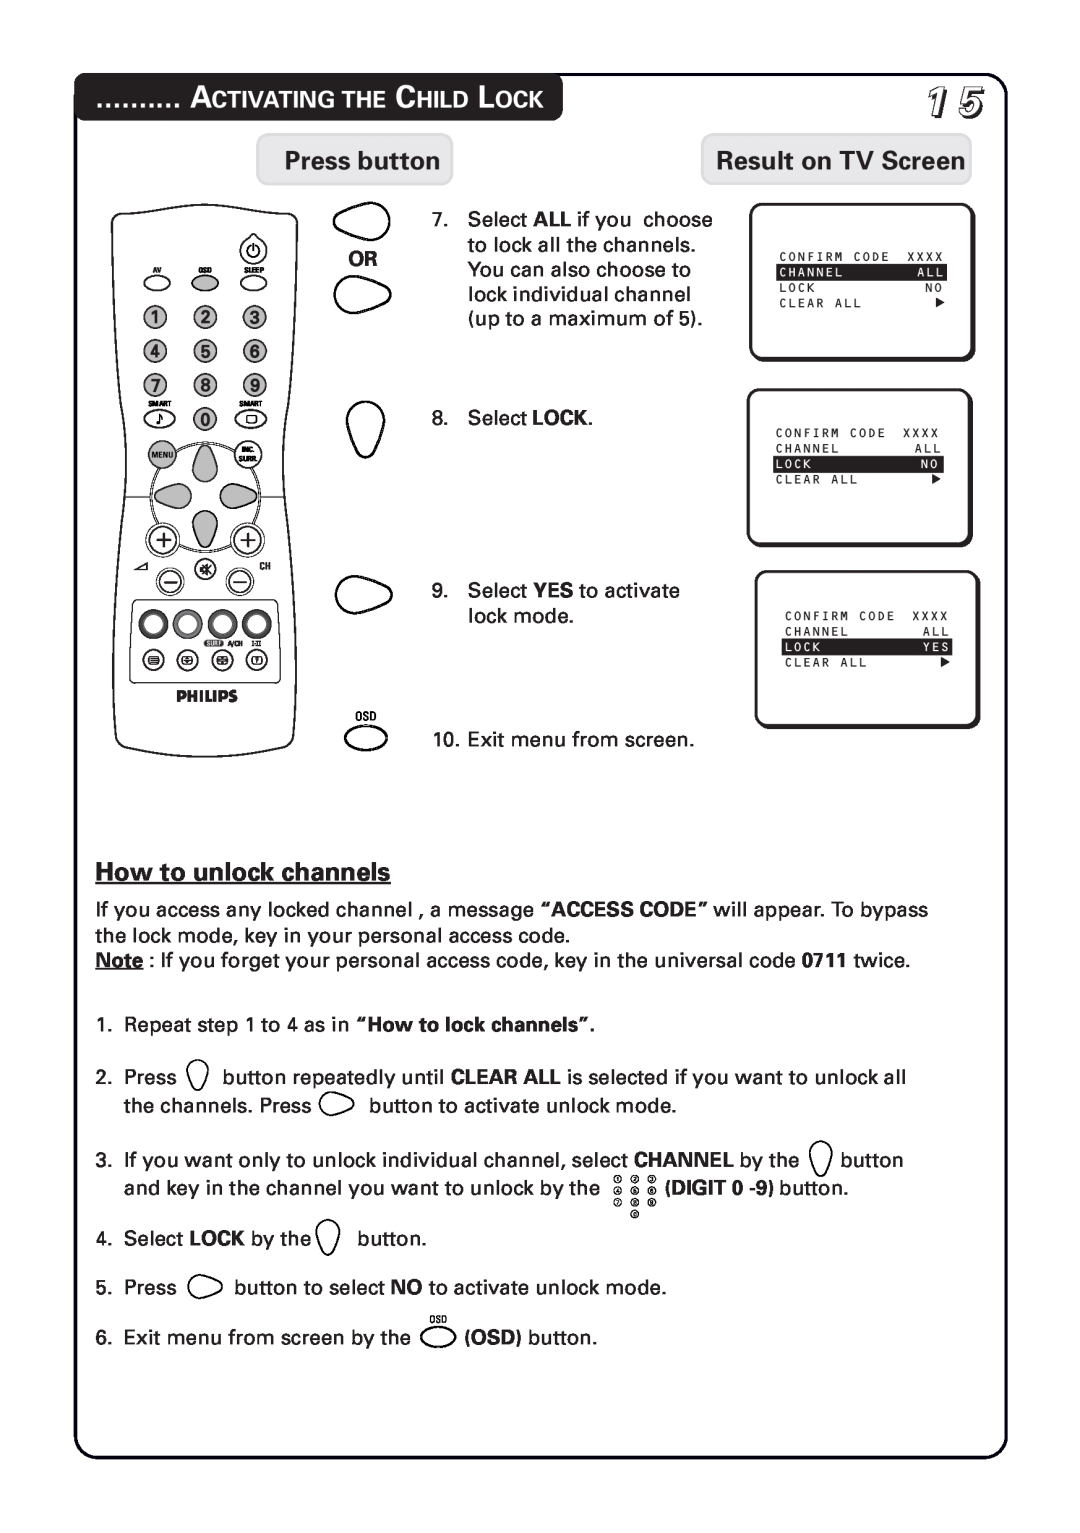 Philips 21PT1582 How to unlock channels, Press button, Result on TV Screen, Activating The Child Lock, DIGIT 0 -9 button 